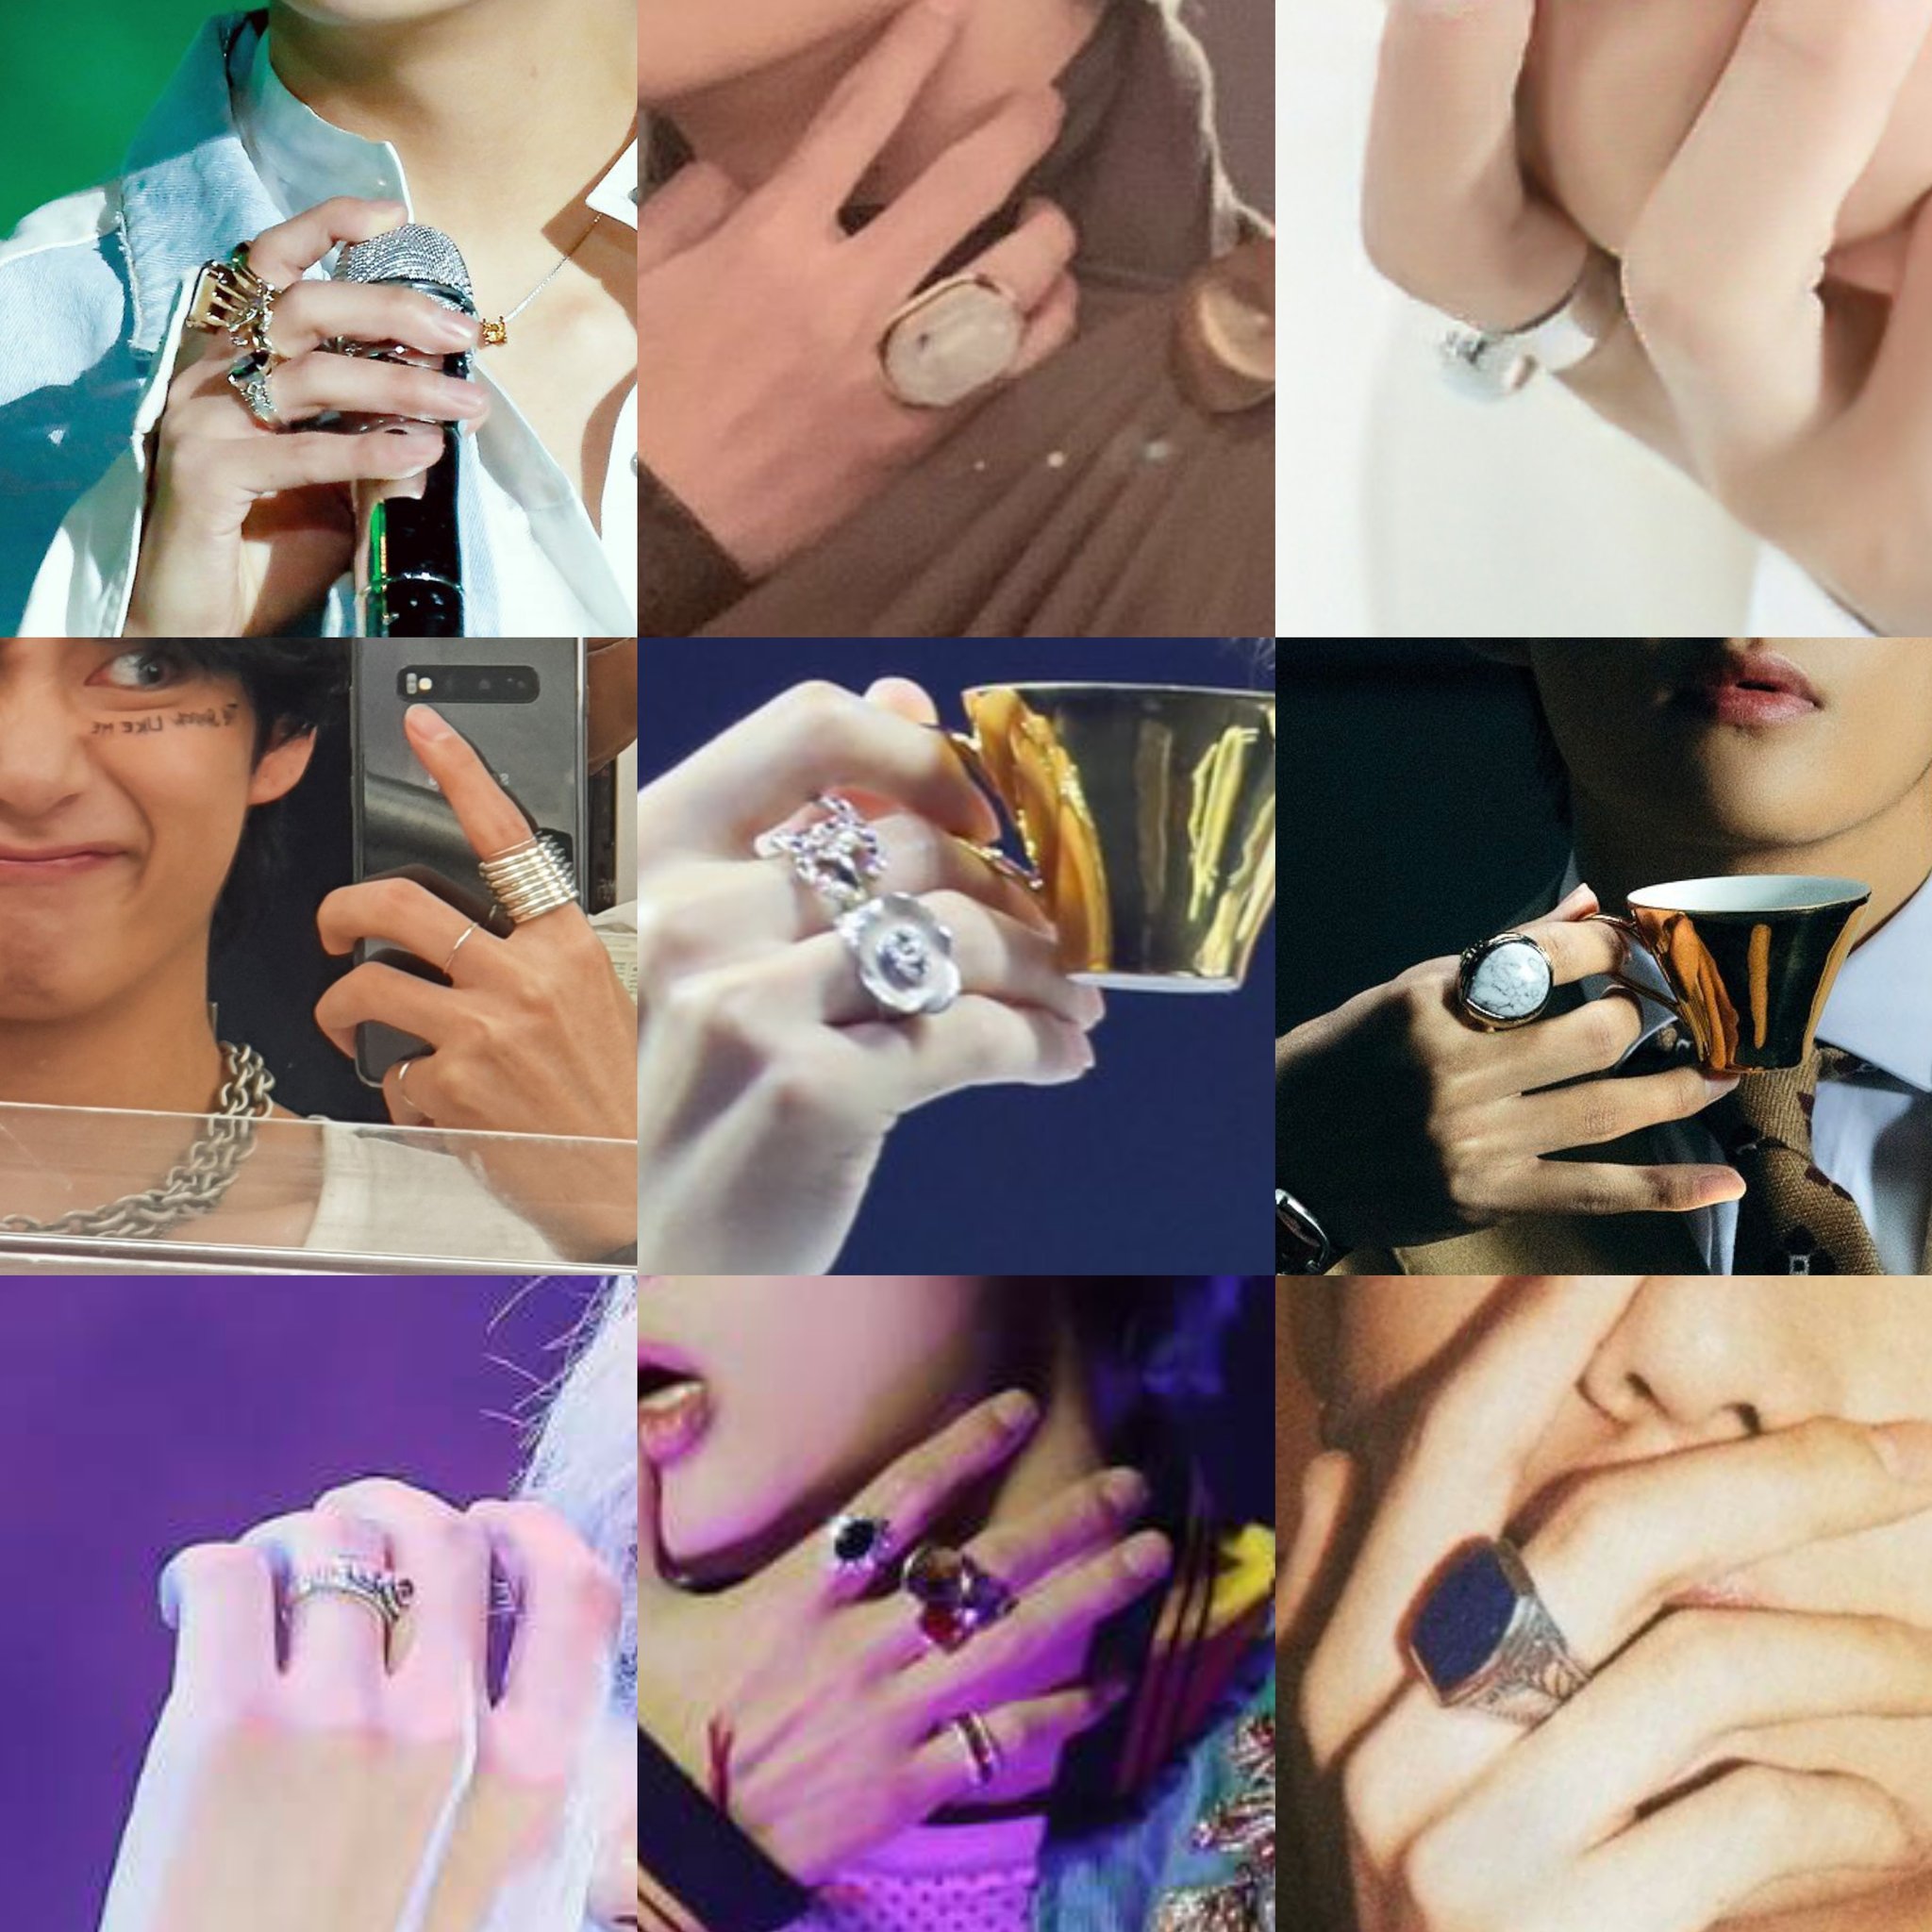 basketbal oogst Uitbarsten BTS V News on Twitter: "Taehyung's ring collection are so pretty  https://t.co/6VjF3LPEZM" / Twitter